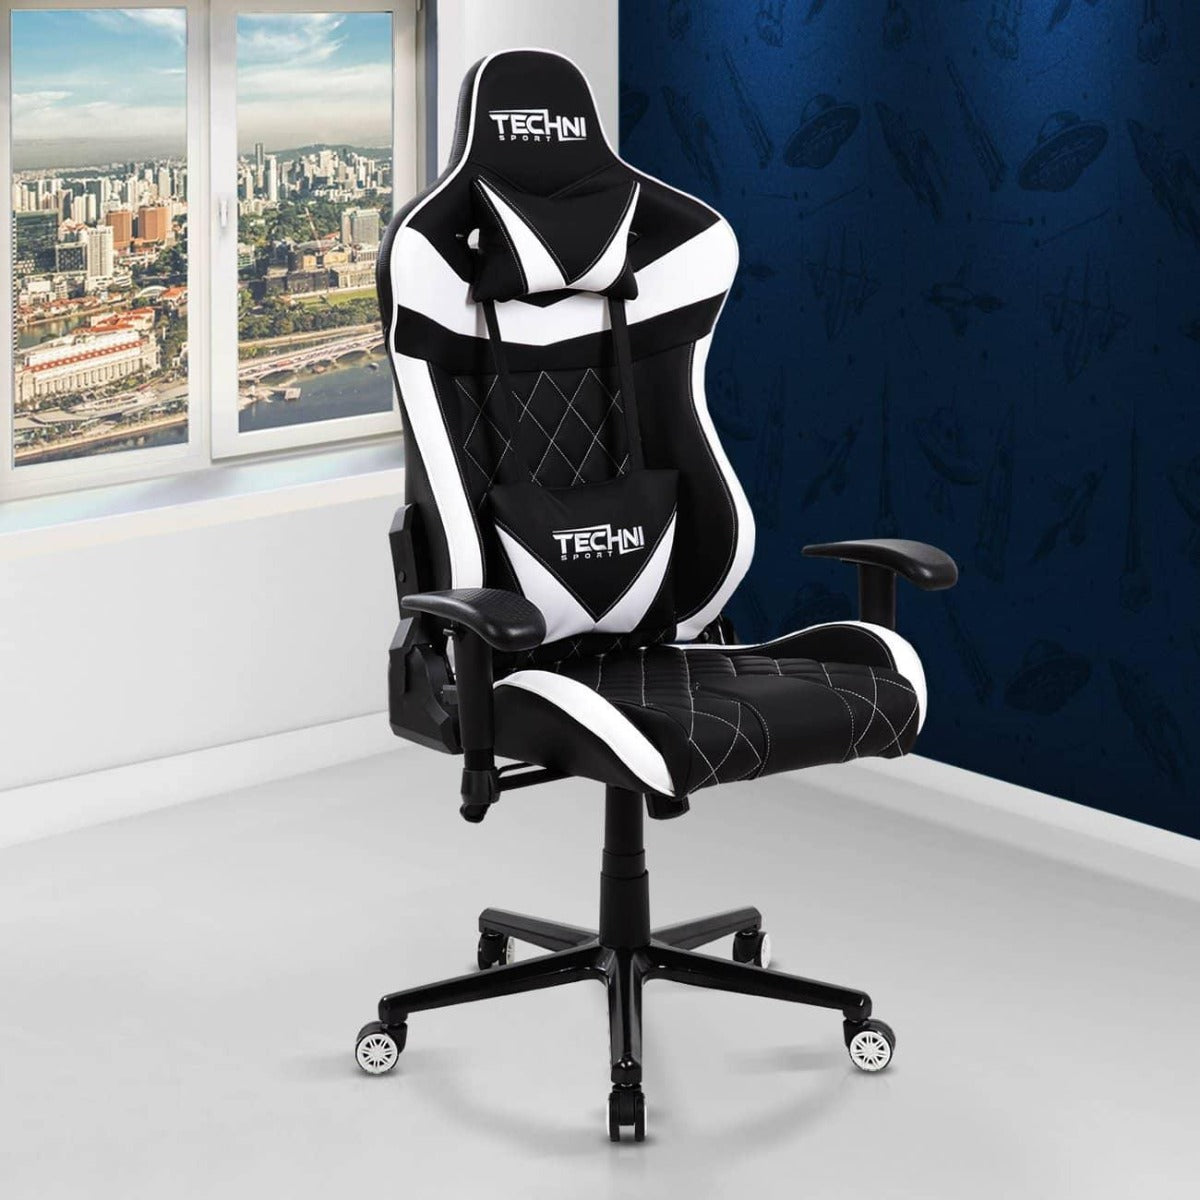 Techni Sport TS-XL1 White Ergonomic High Back Racer Style PC Gaming Chair RTA-TSXL1-WHT in Office